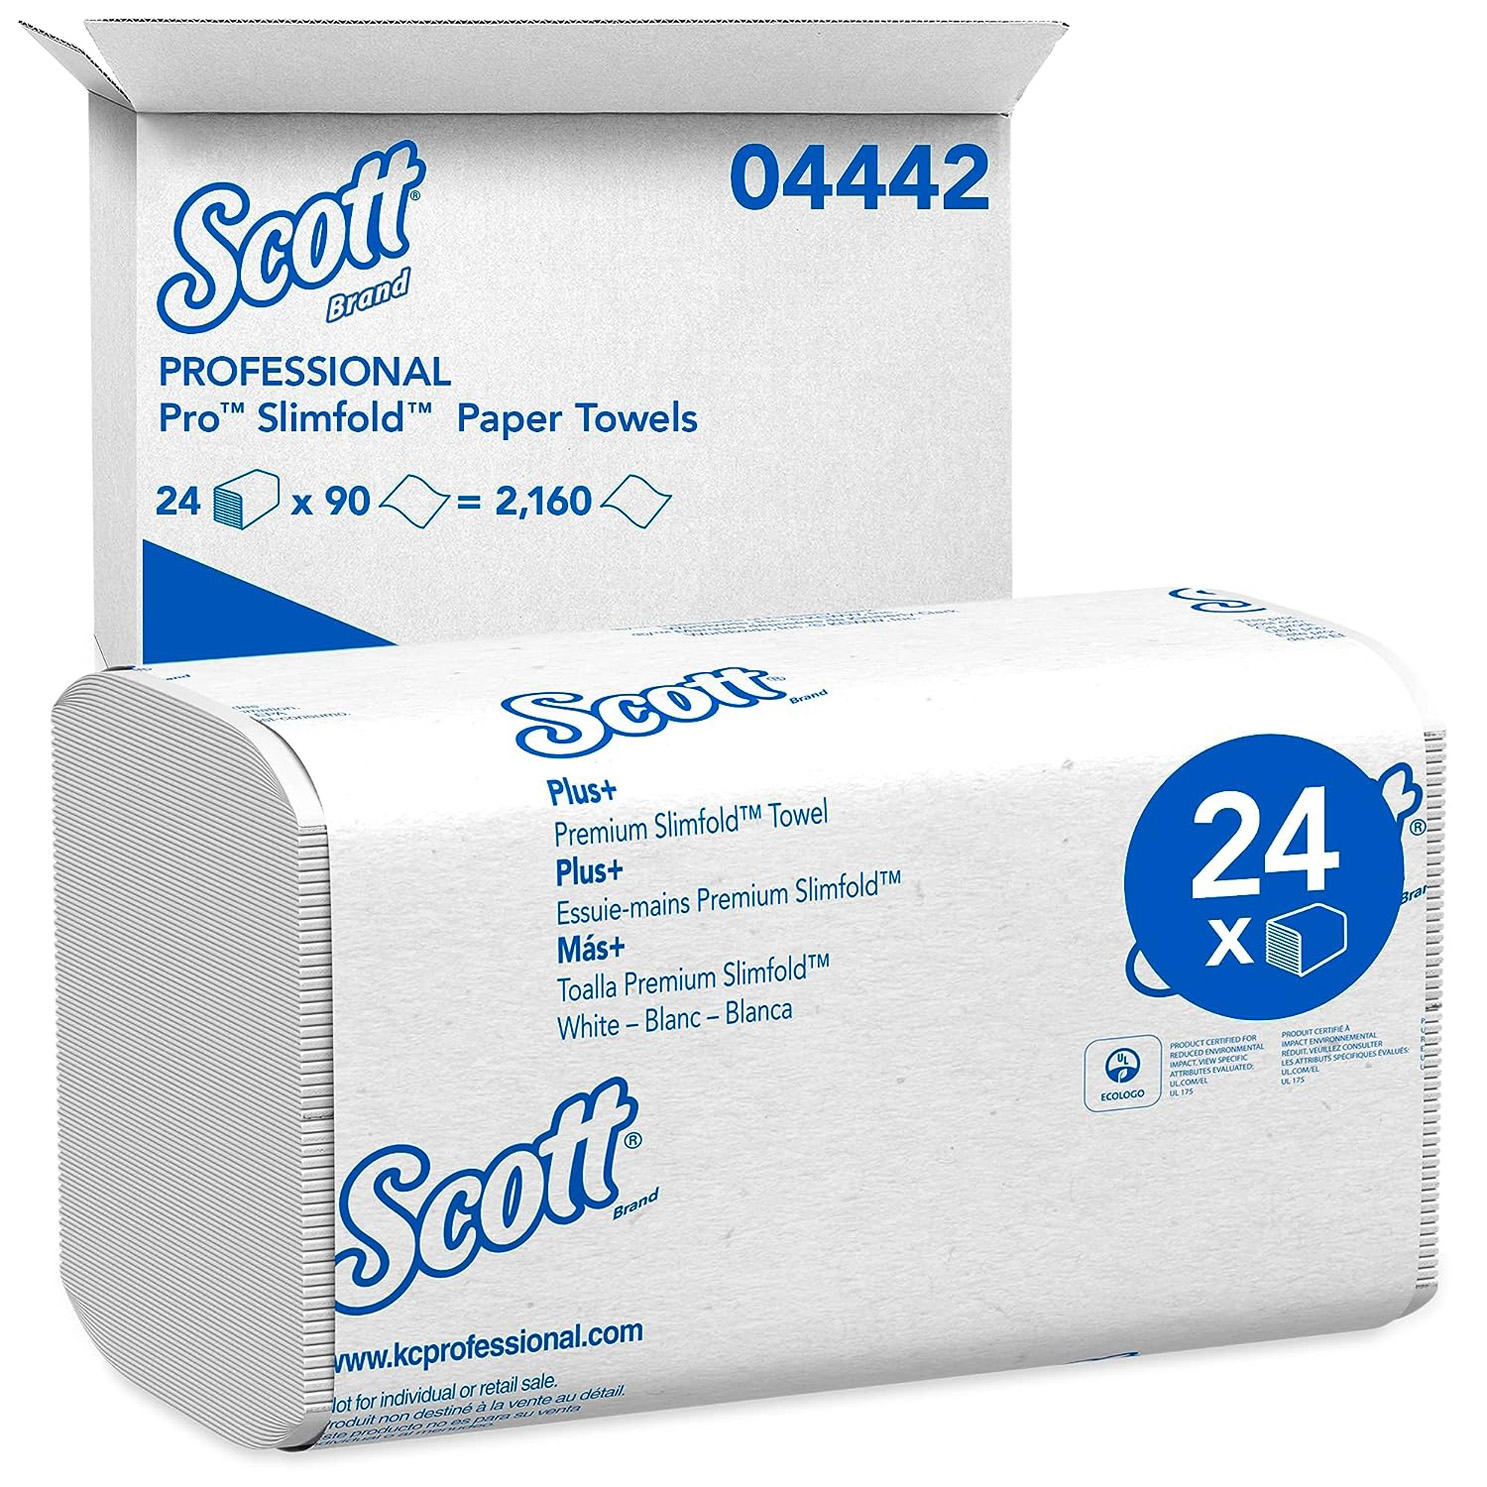 Scott Control Hand Towels Slimfold, White, 24 Packs , 90 Count